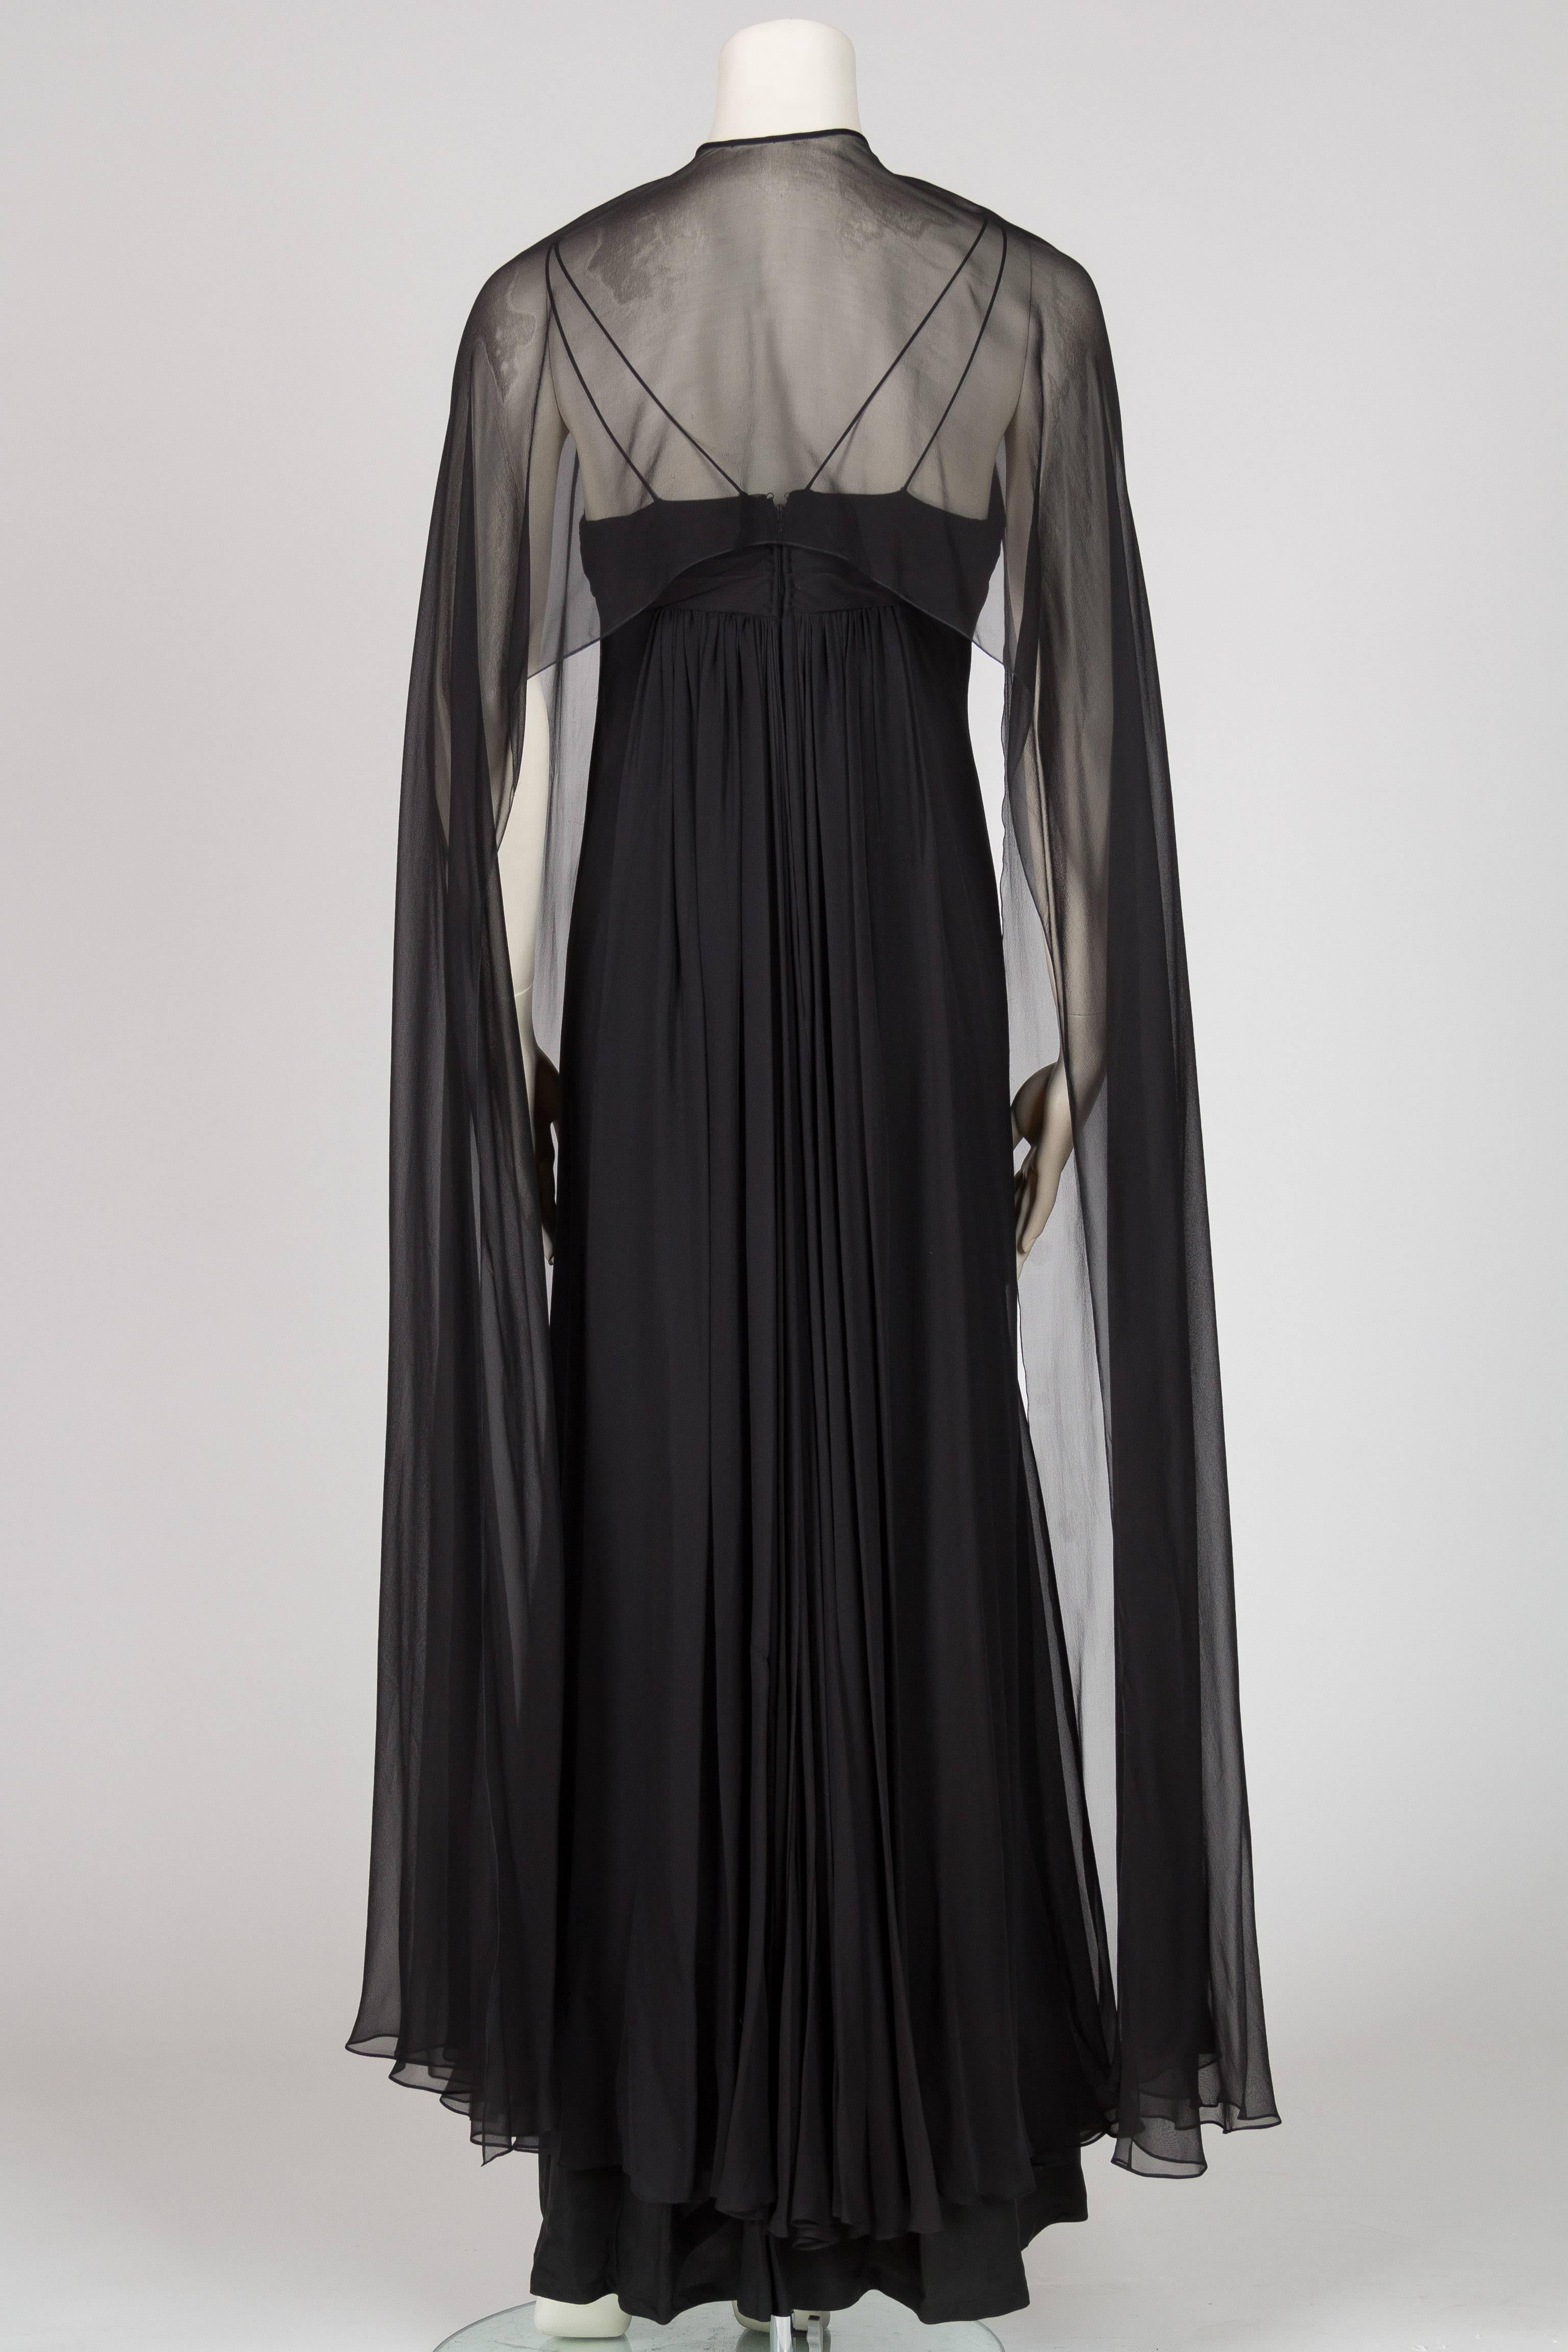 1970s Alfred Bosand Beaded Silk Chiffon Gown with Cape 1